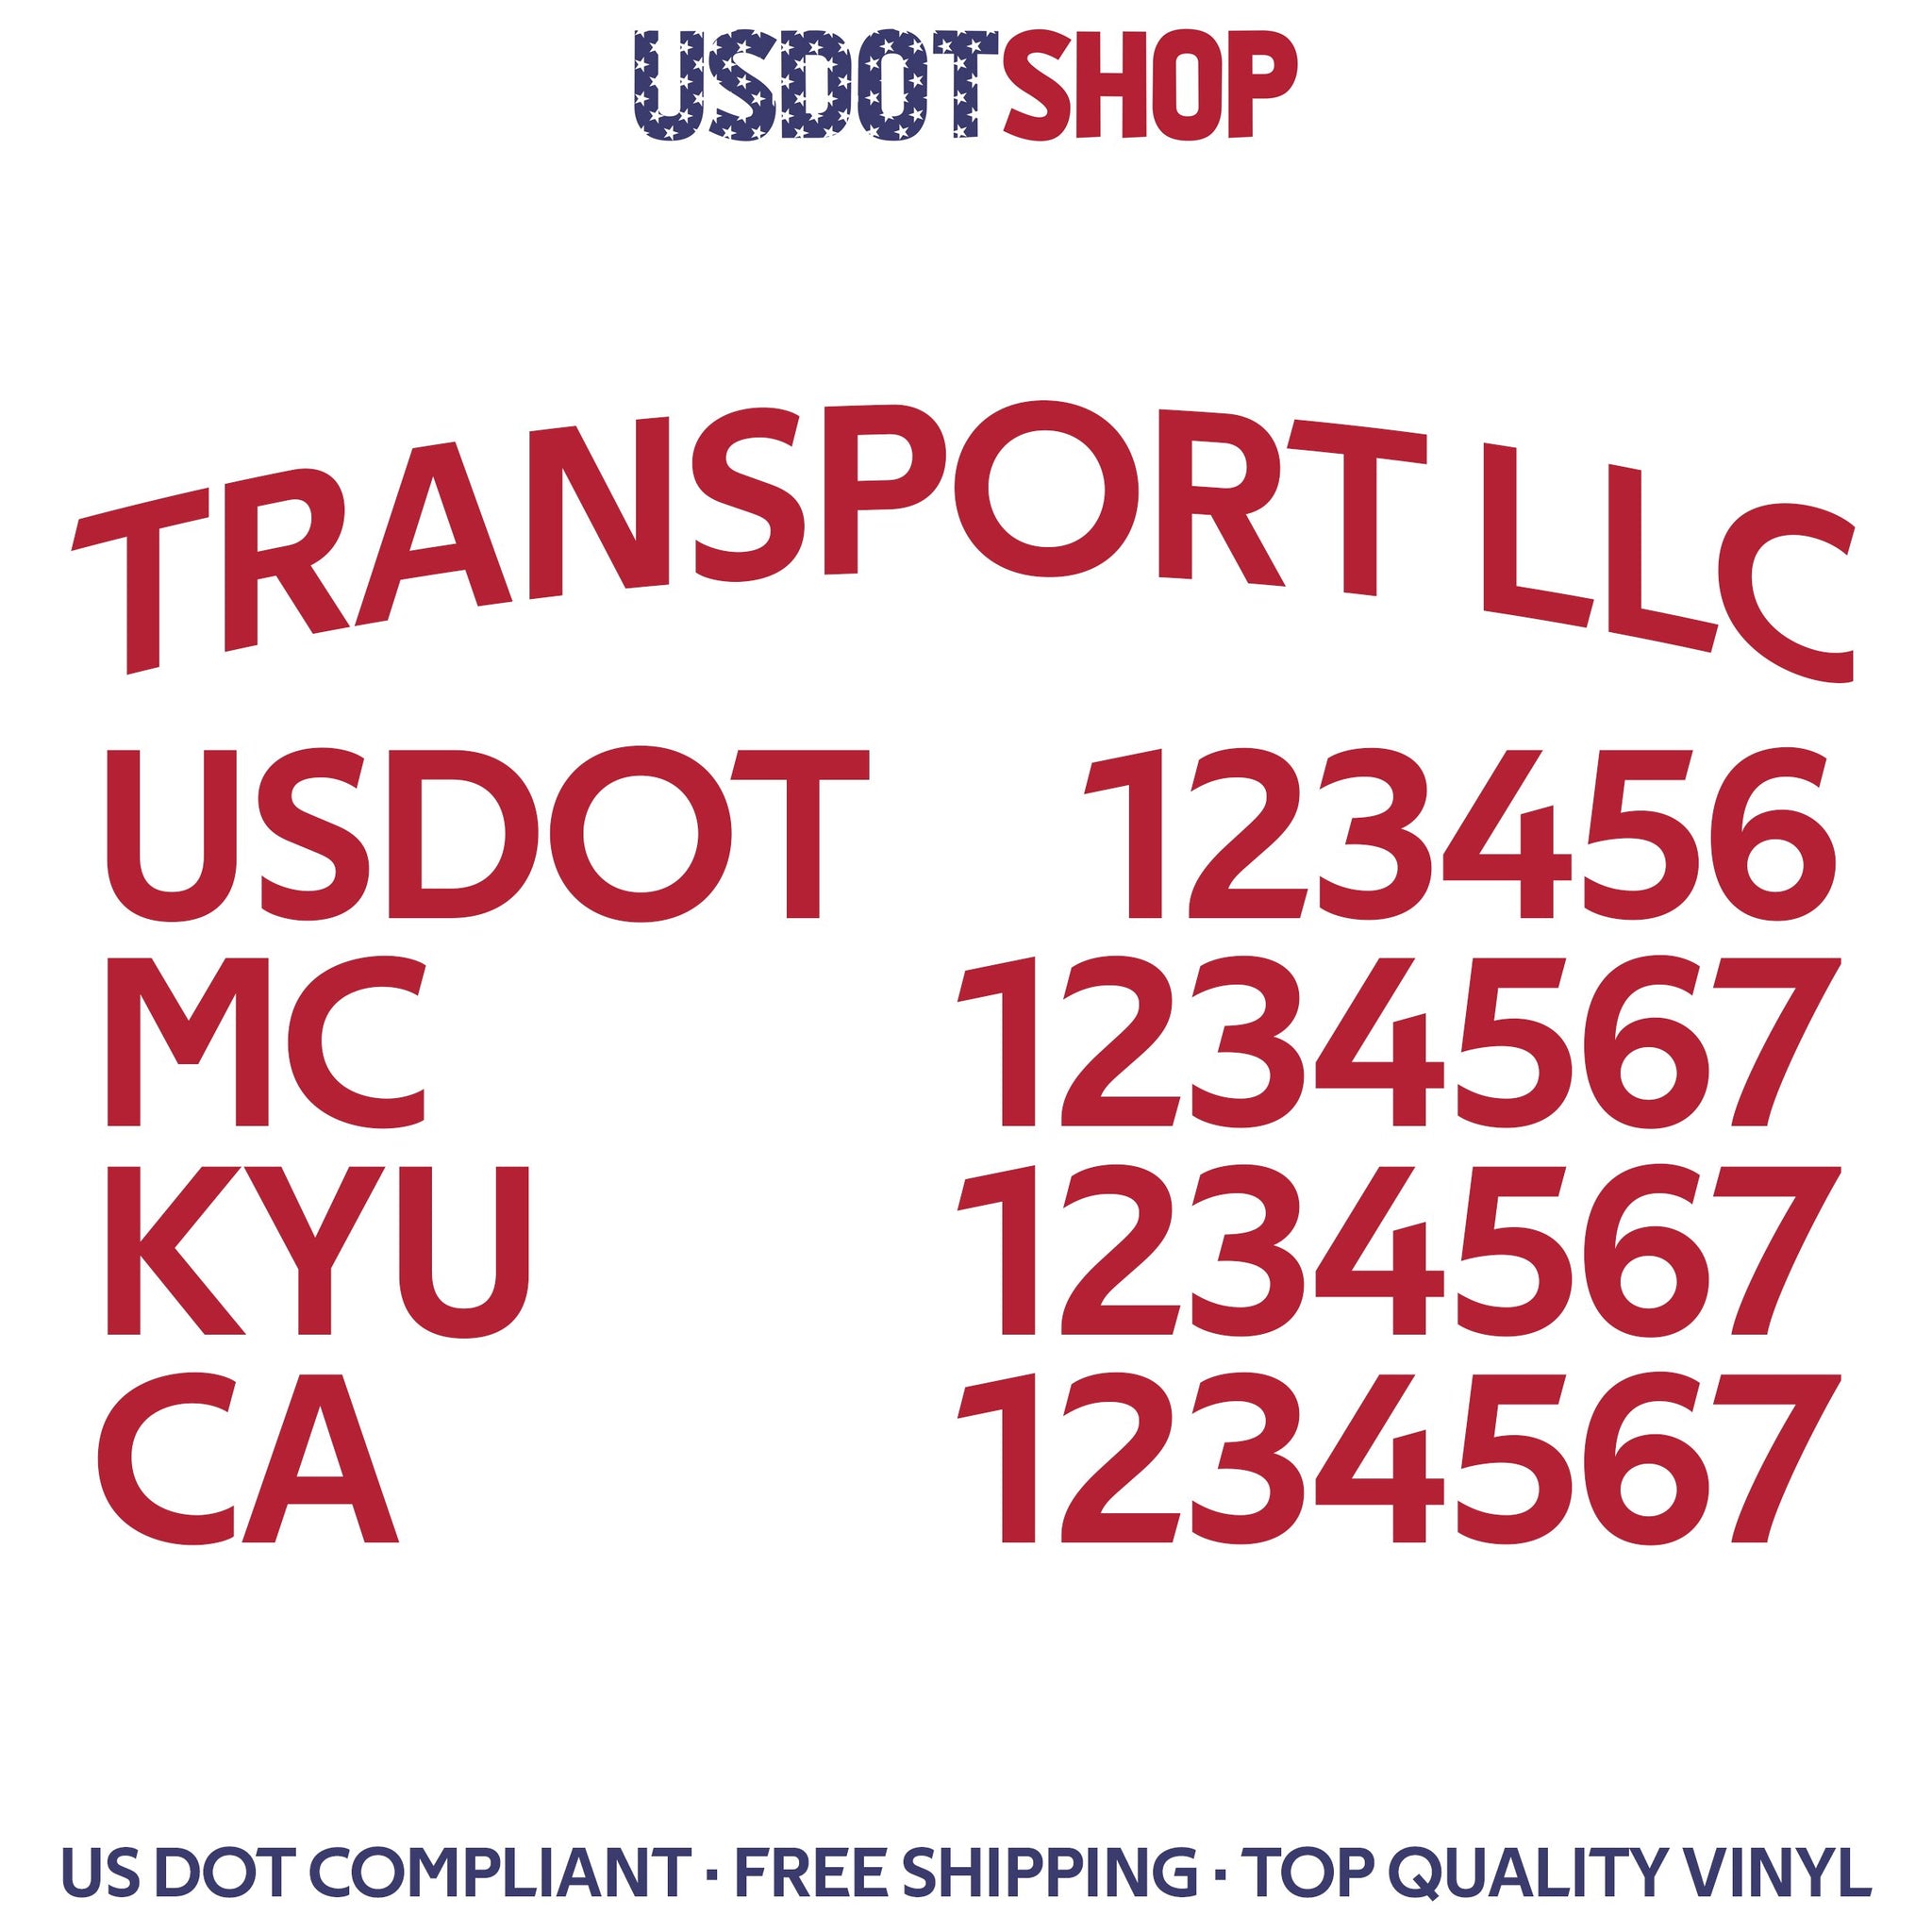 arched company name with usdot, mc, kyu & ca number decal sticker